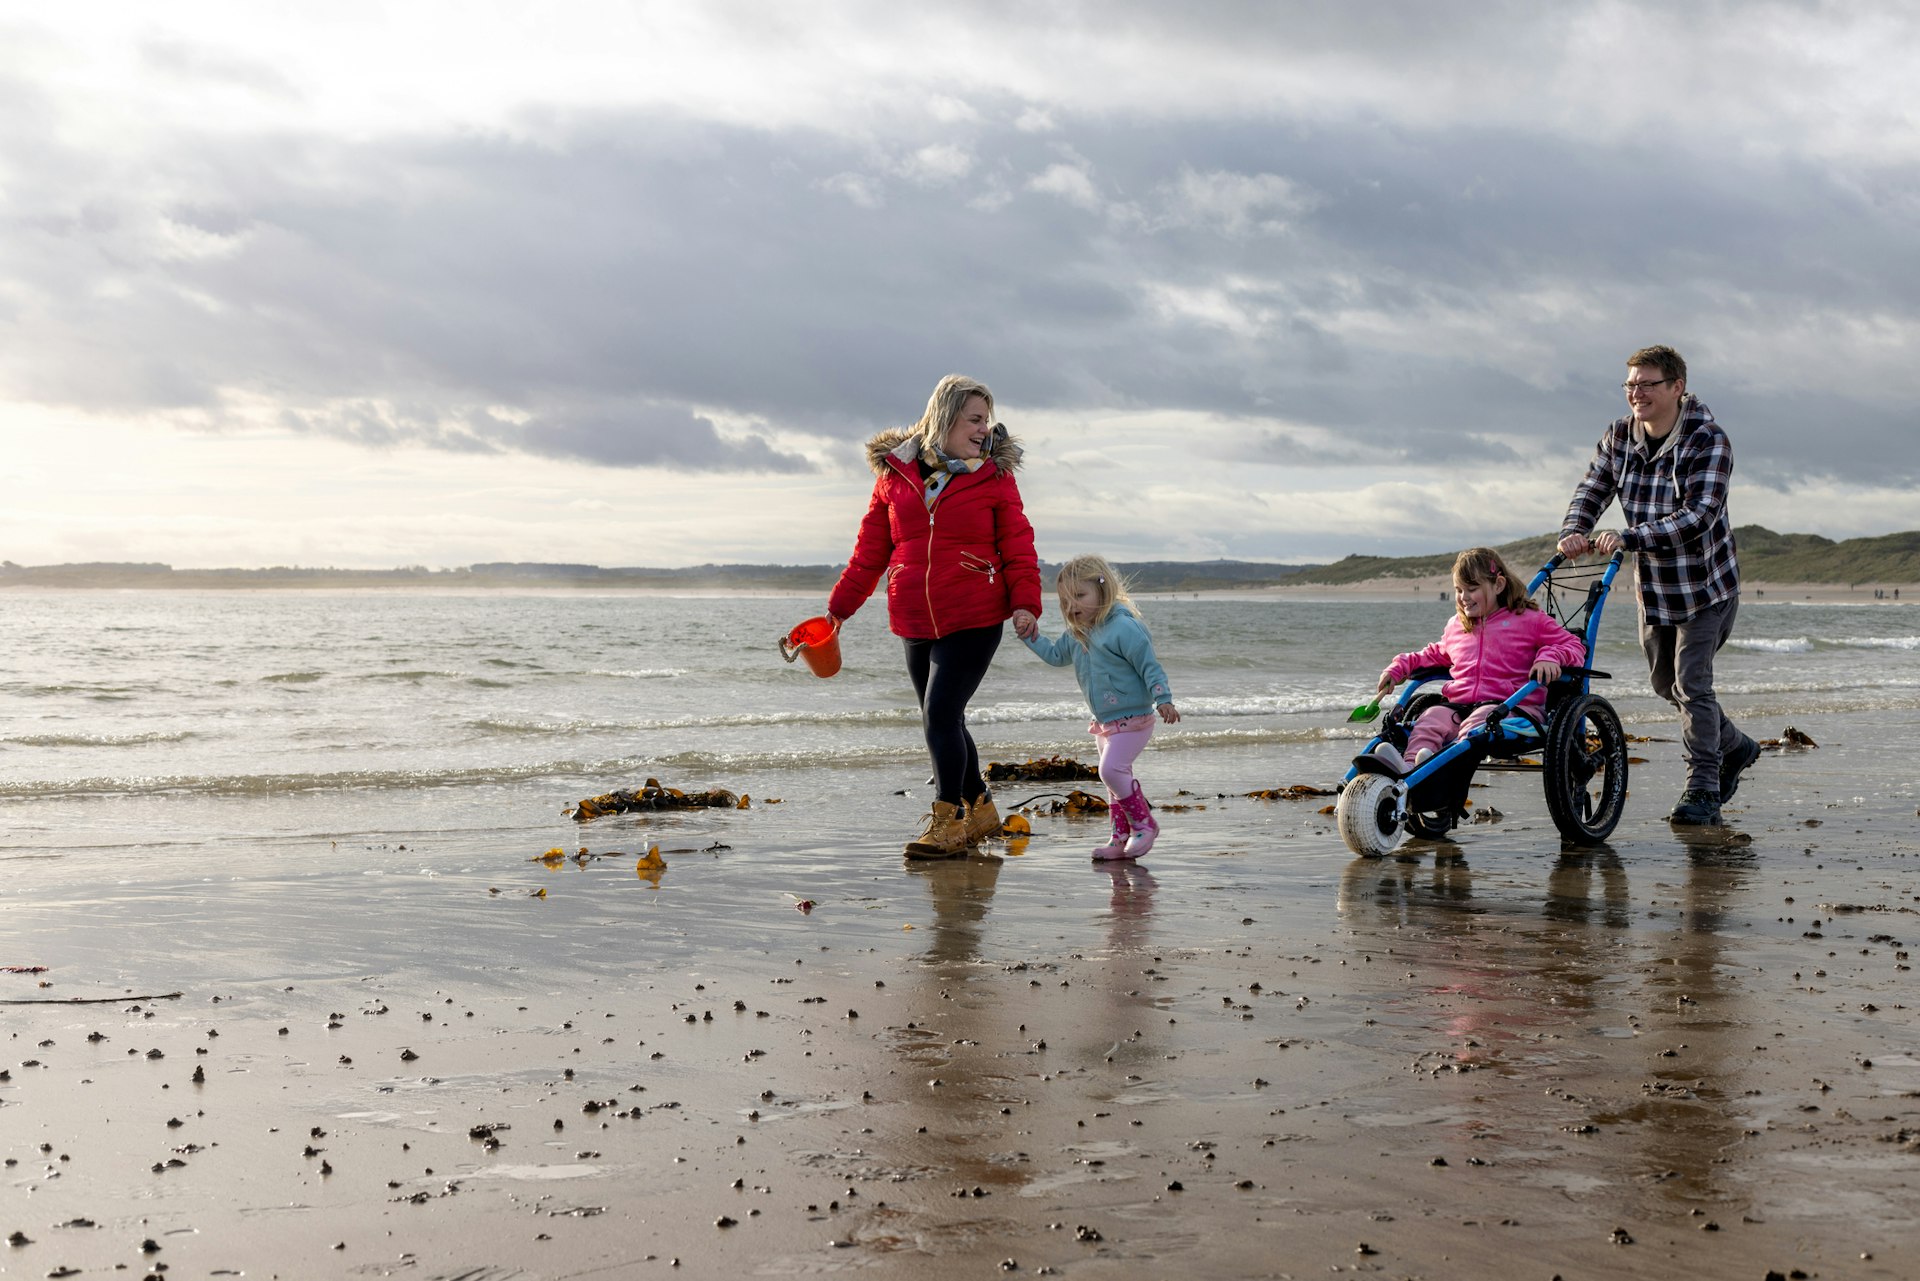 A family of four on an English beach on a slightly grey day. The mum and youngest walk along with a bucket and spade; the dad pushes the elder child in a beach-adapted wheelchair